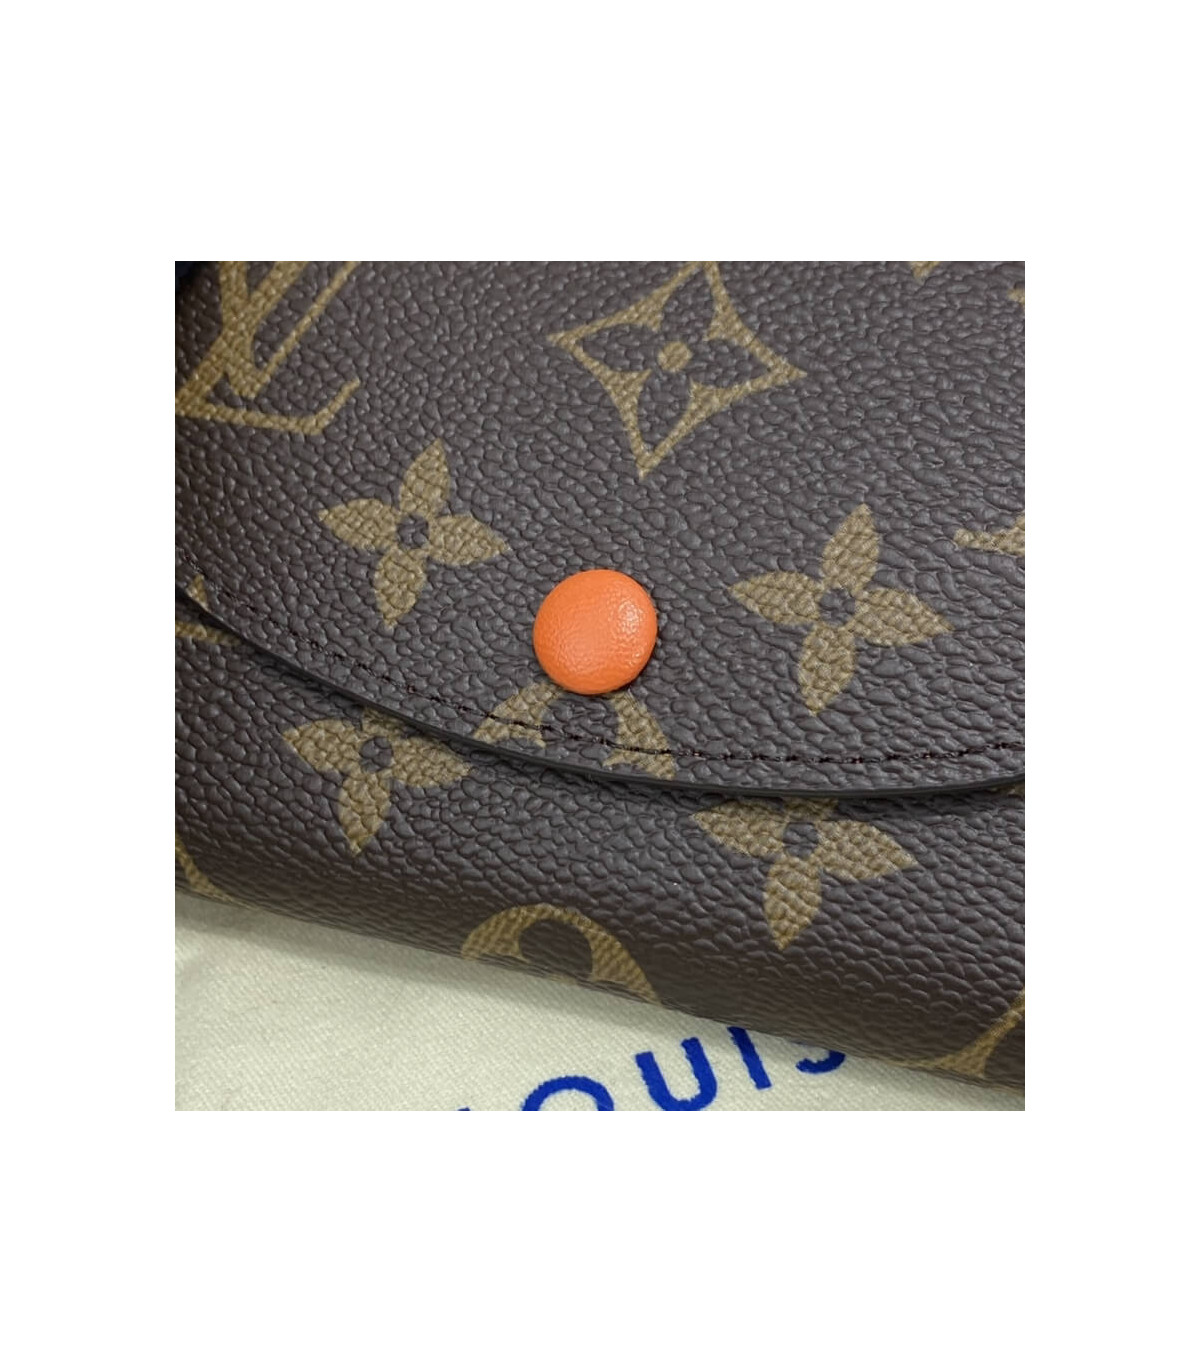 NEW RELEASE LOUIS VUITTON ROSALIE COIN PURSE 👛 completely new